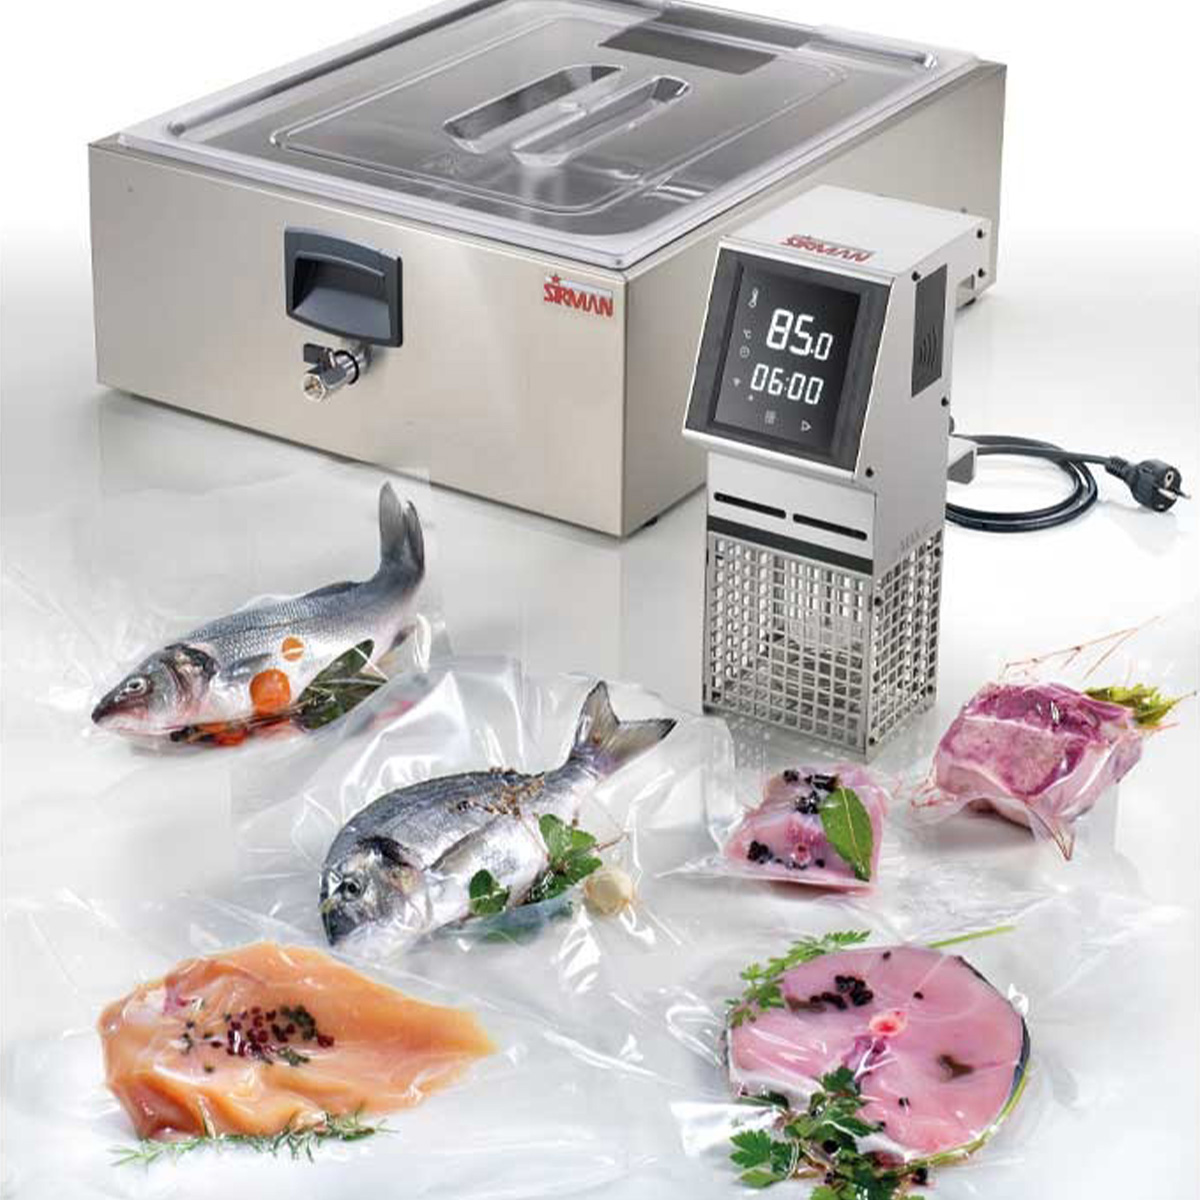 FEM introduces Sirman SoftCooker sous vide system for ease of use and precise process control publicityworks.biz/2023/12/sous-v… #sousvide #sousvidecookingsystem #foodquality #cookingprocess